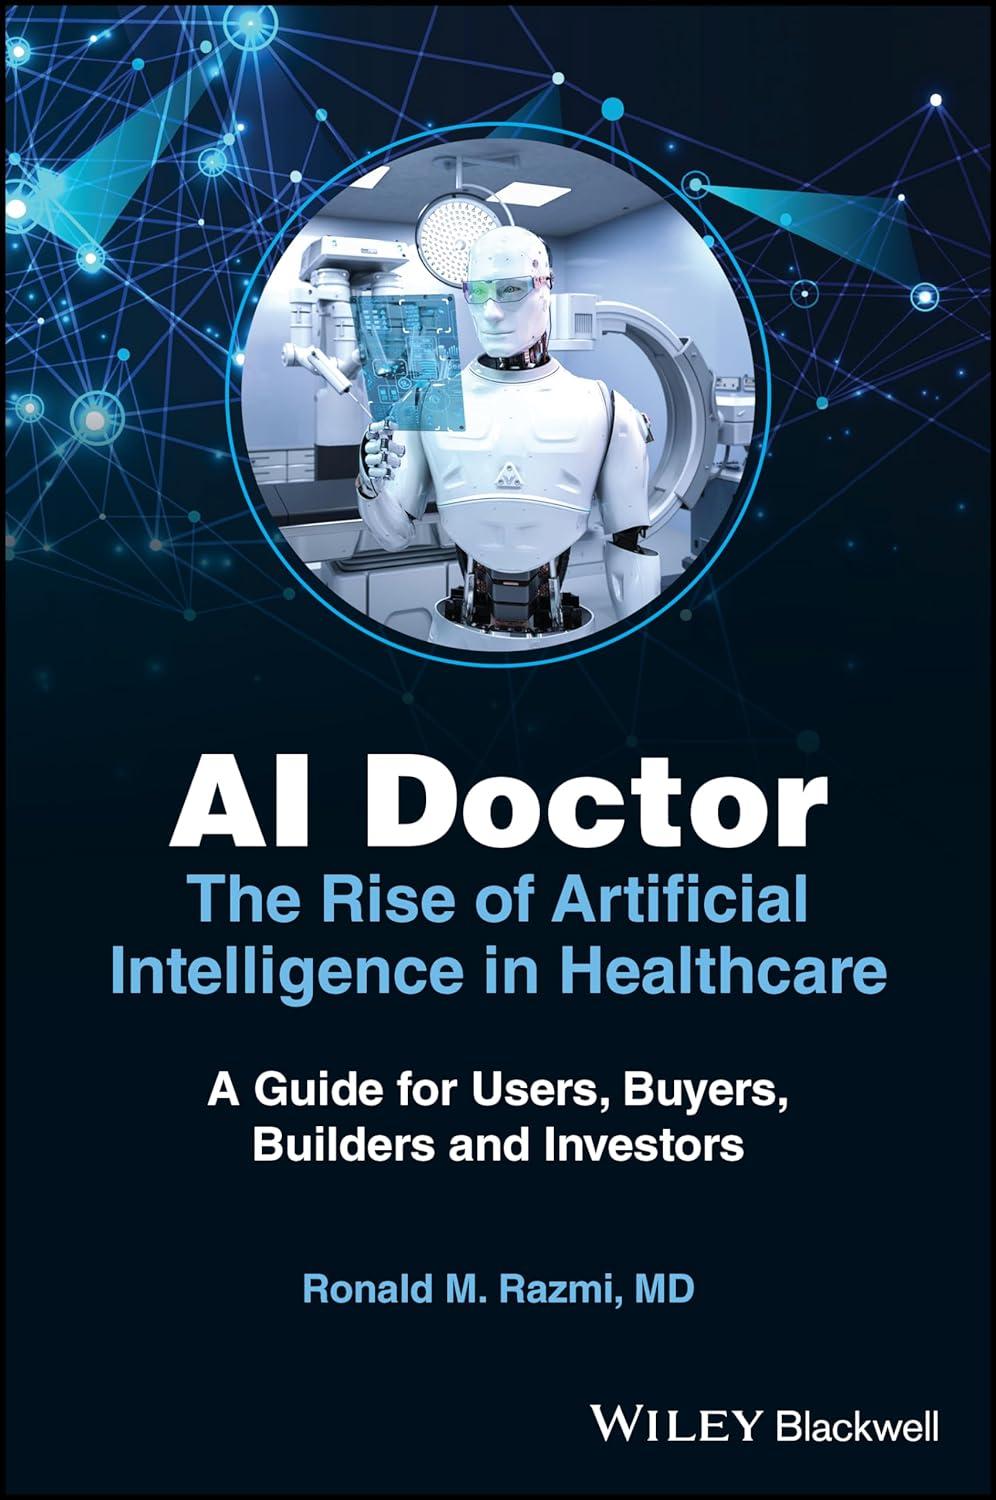 ai doctor  the rise of artificial intelligence in healthcare  a guide for users  buyers  builders  and